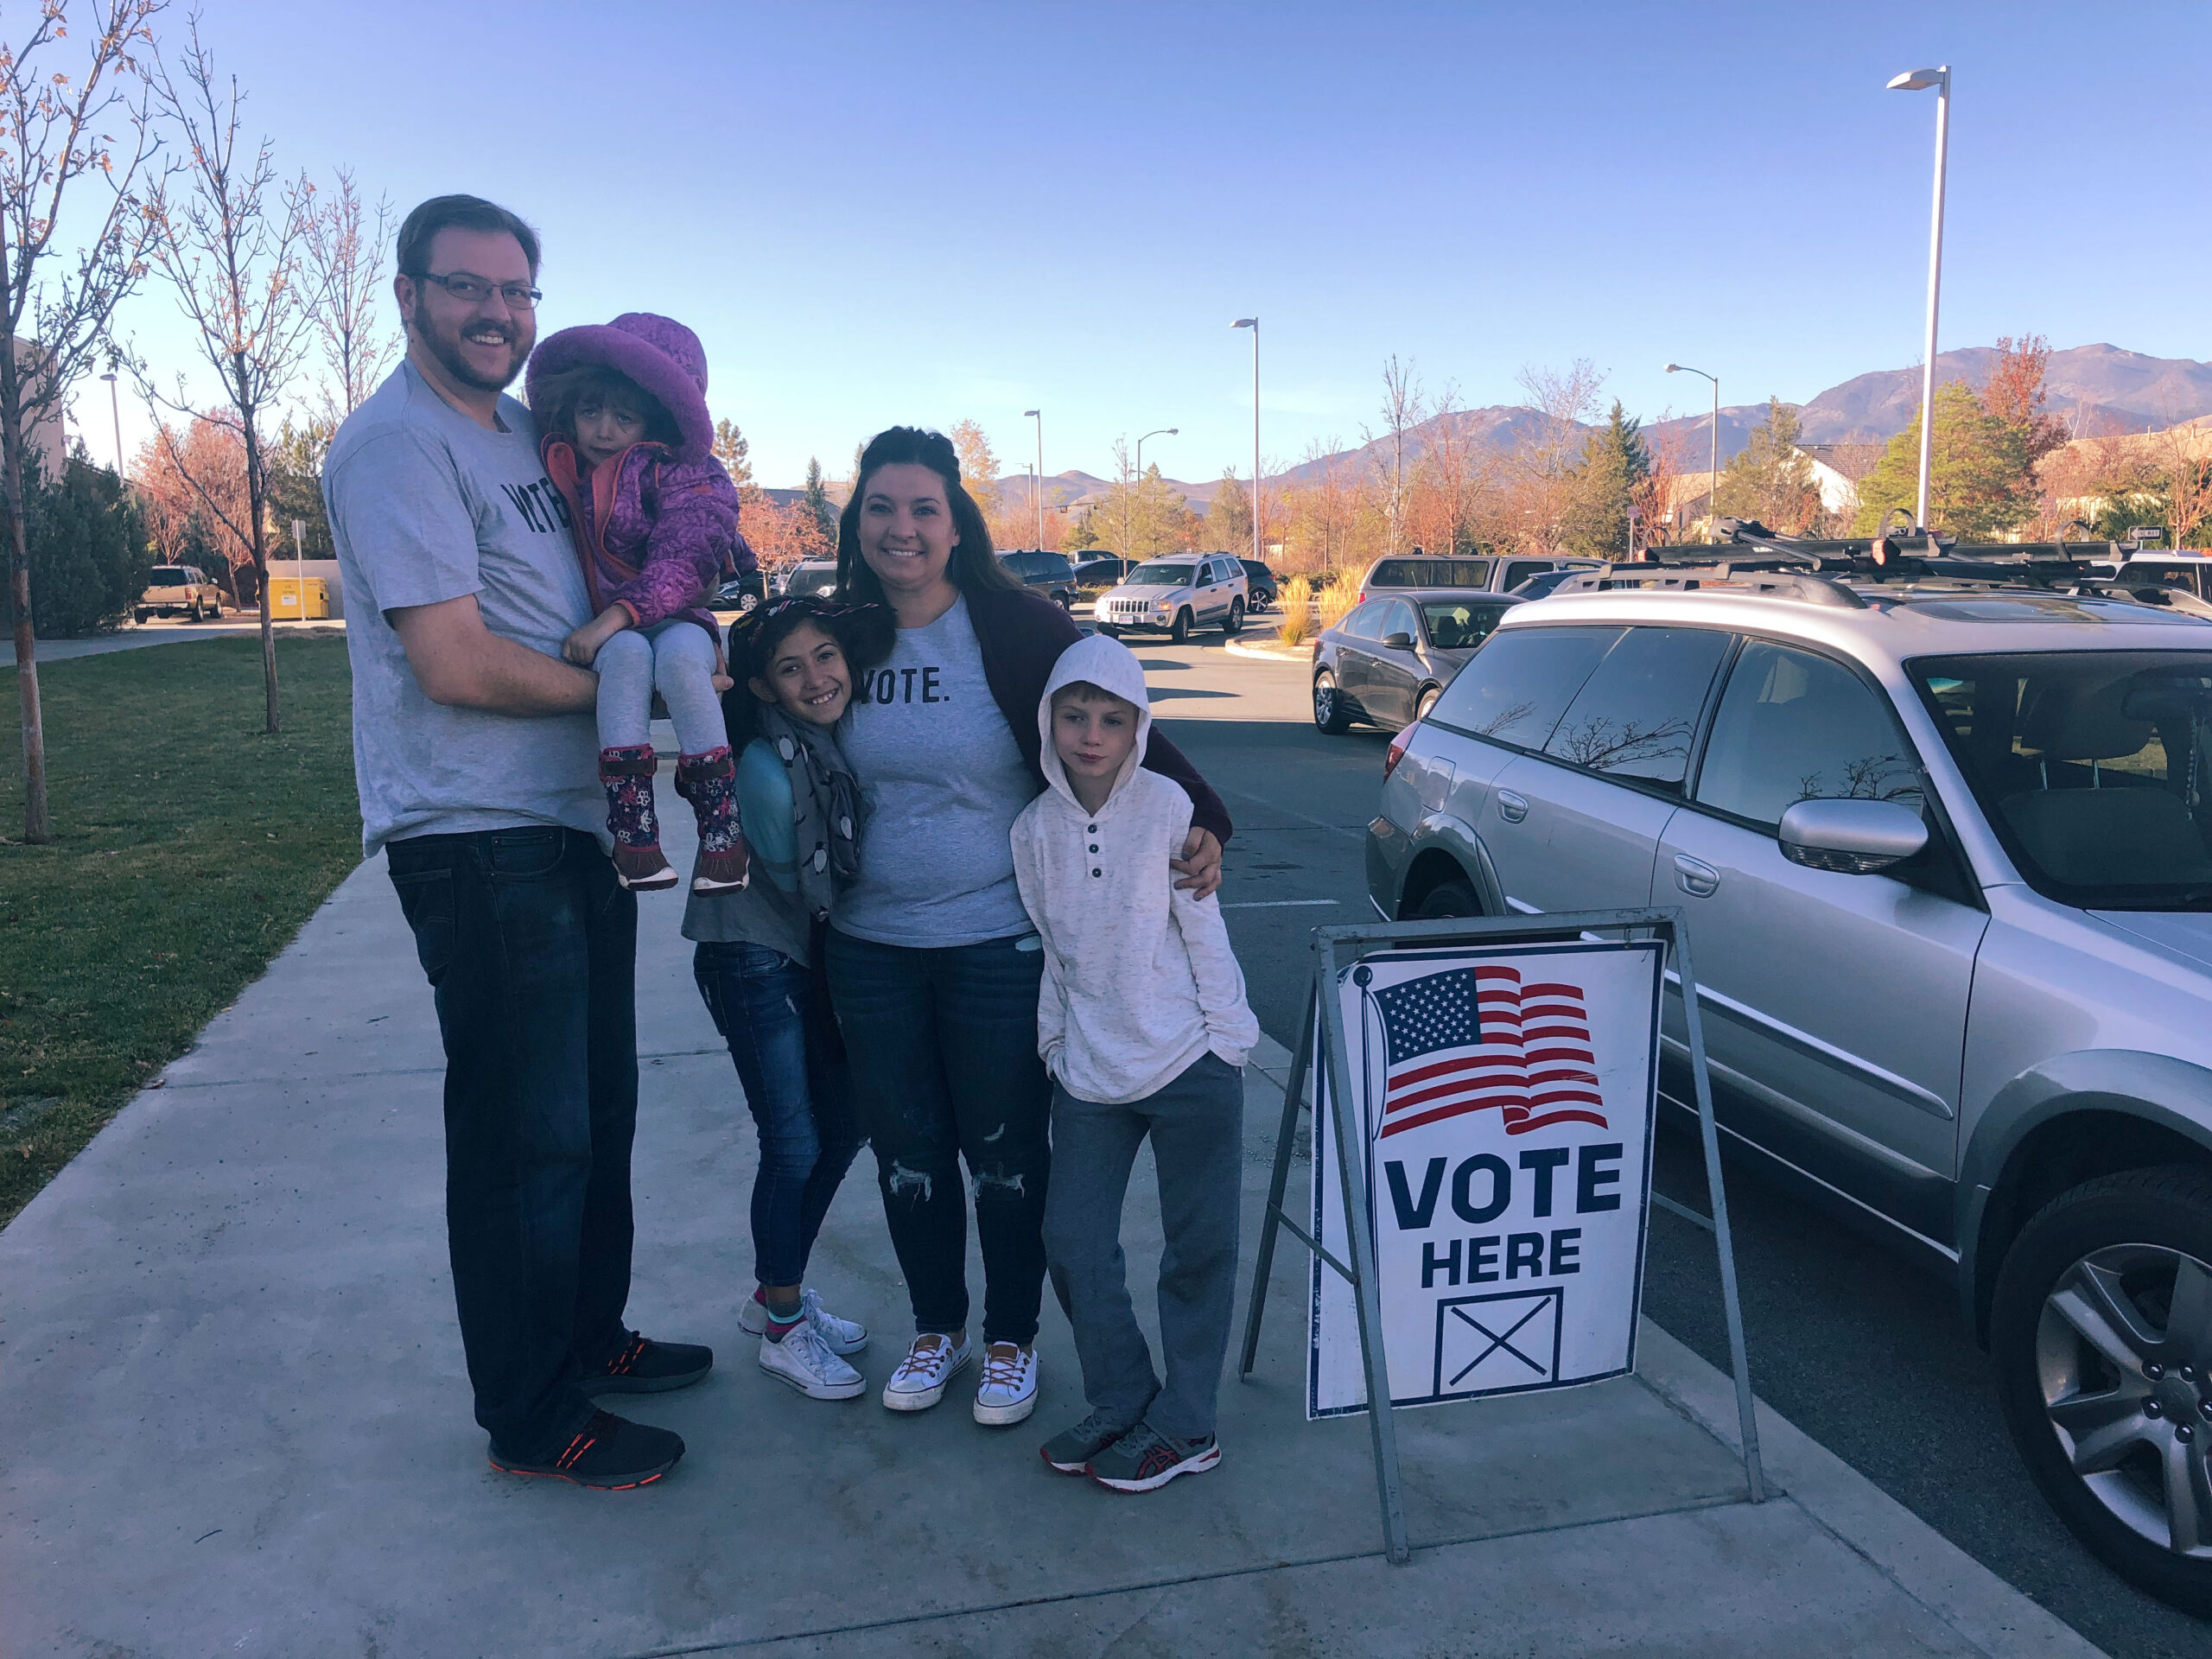 Christine Hull with her family. Husband, Will, oldest daughter, Ainsleigh, son, Nolan, and youngest daughter, Delaney on Election Day.